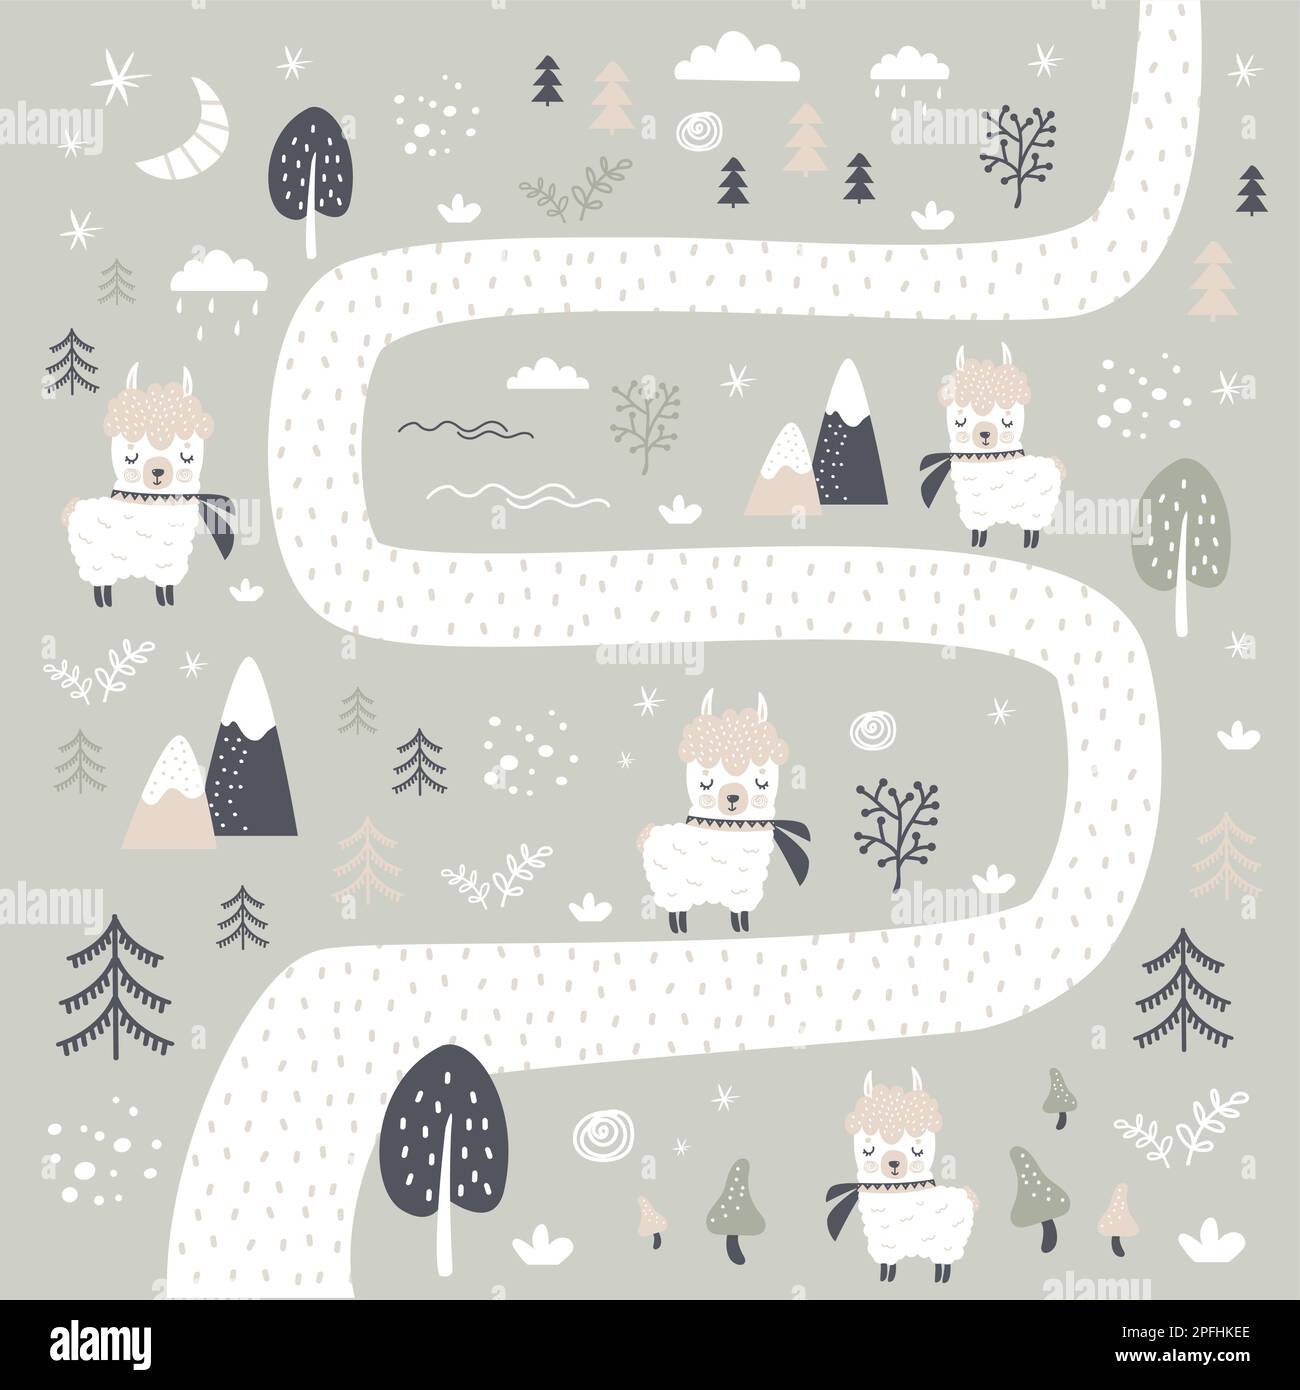 Cute hand drawn background in scandinavian style. Road in forest and funny doodle llamas and plants. Adorable alpacas. Vector illustration. Stock Vector